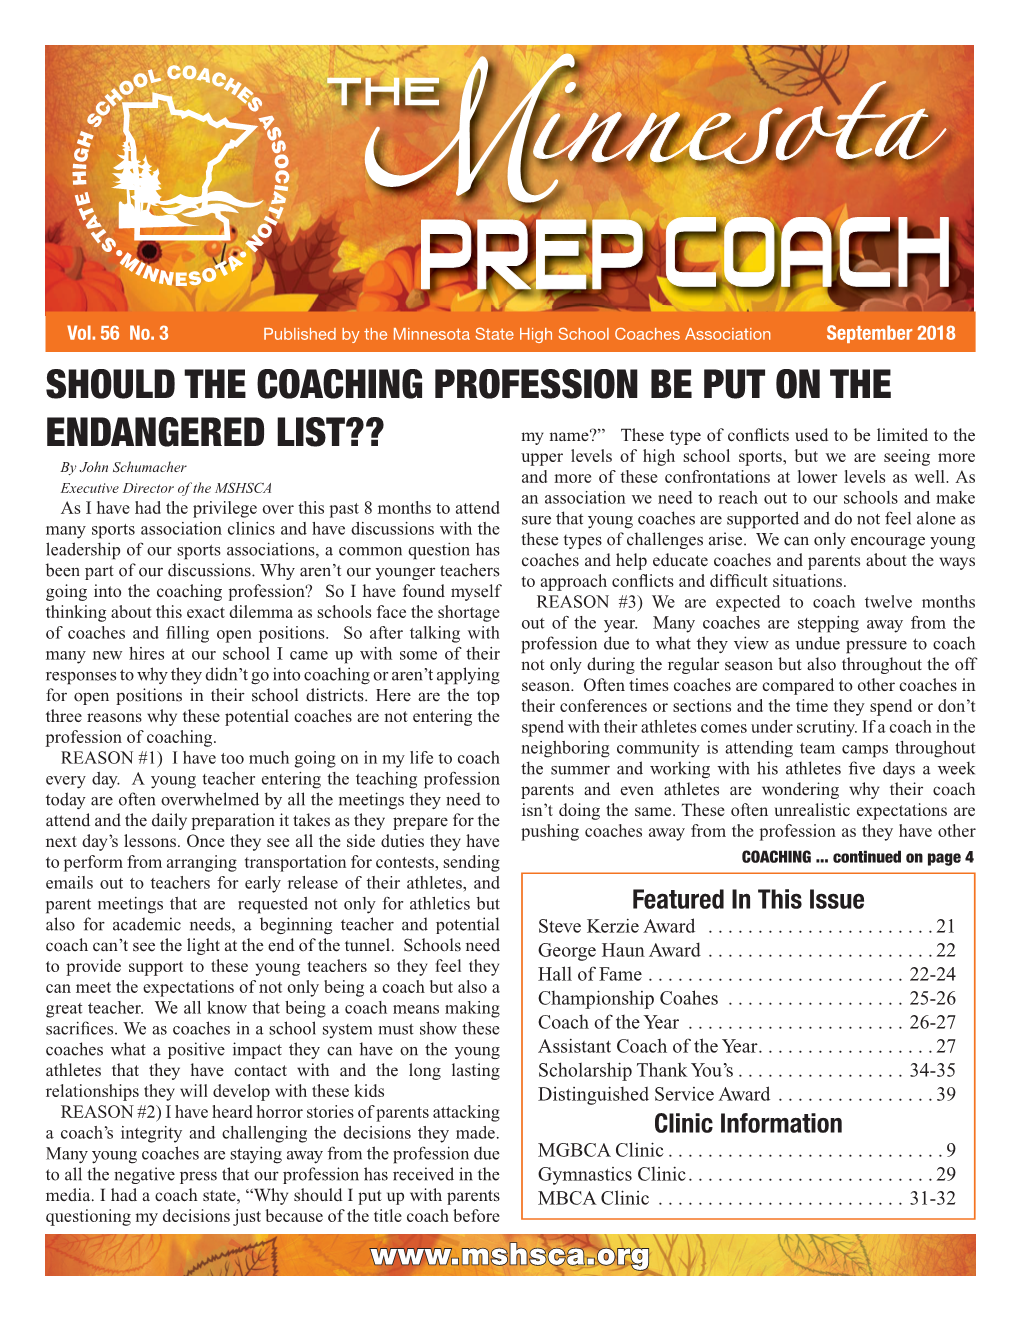 Should the Coaching Profession Be Put on the Endangered List??